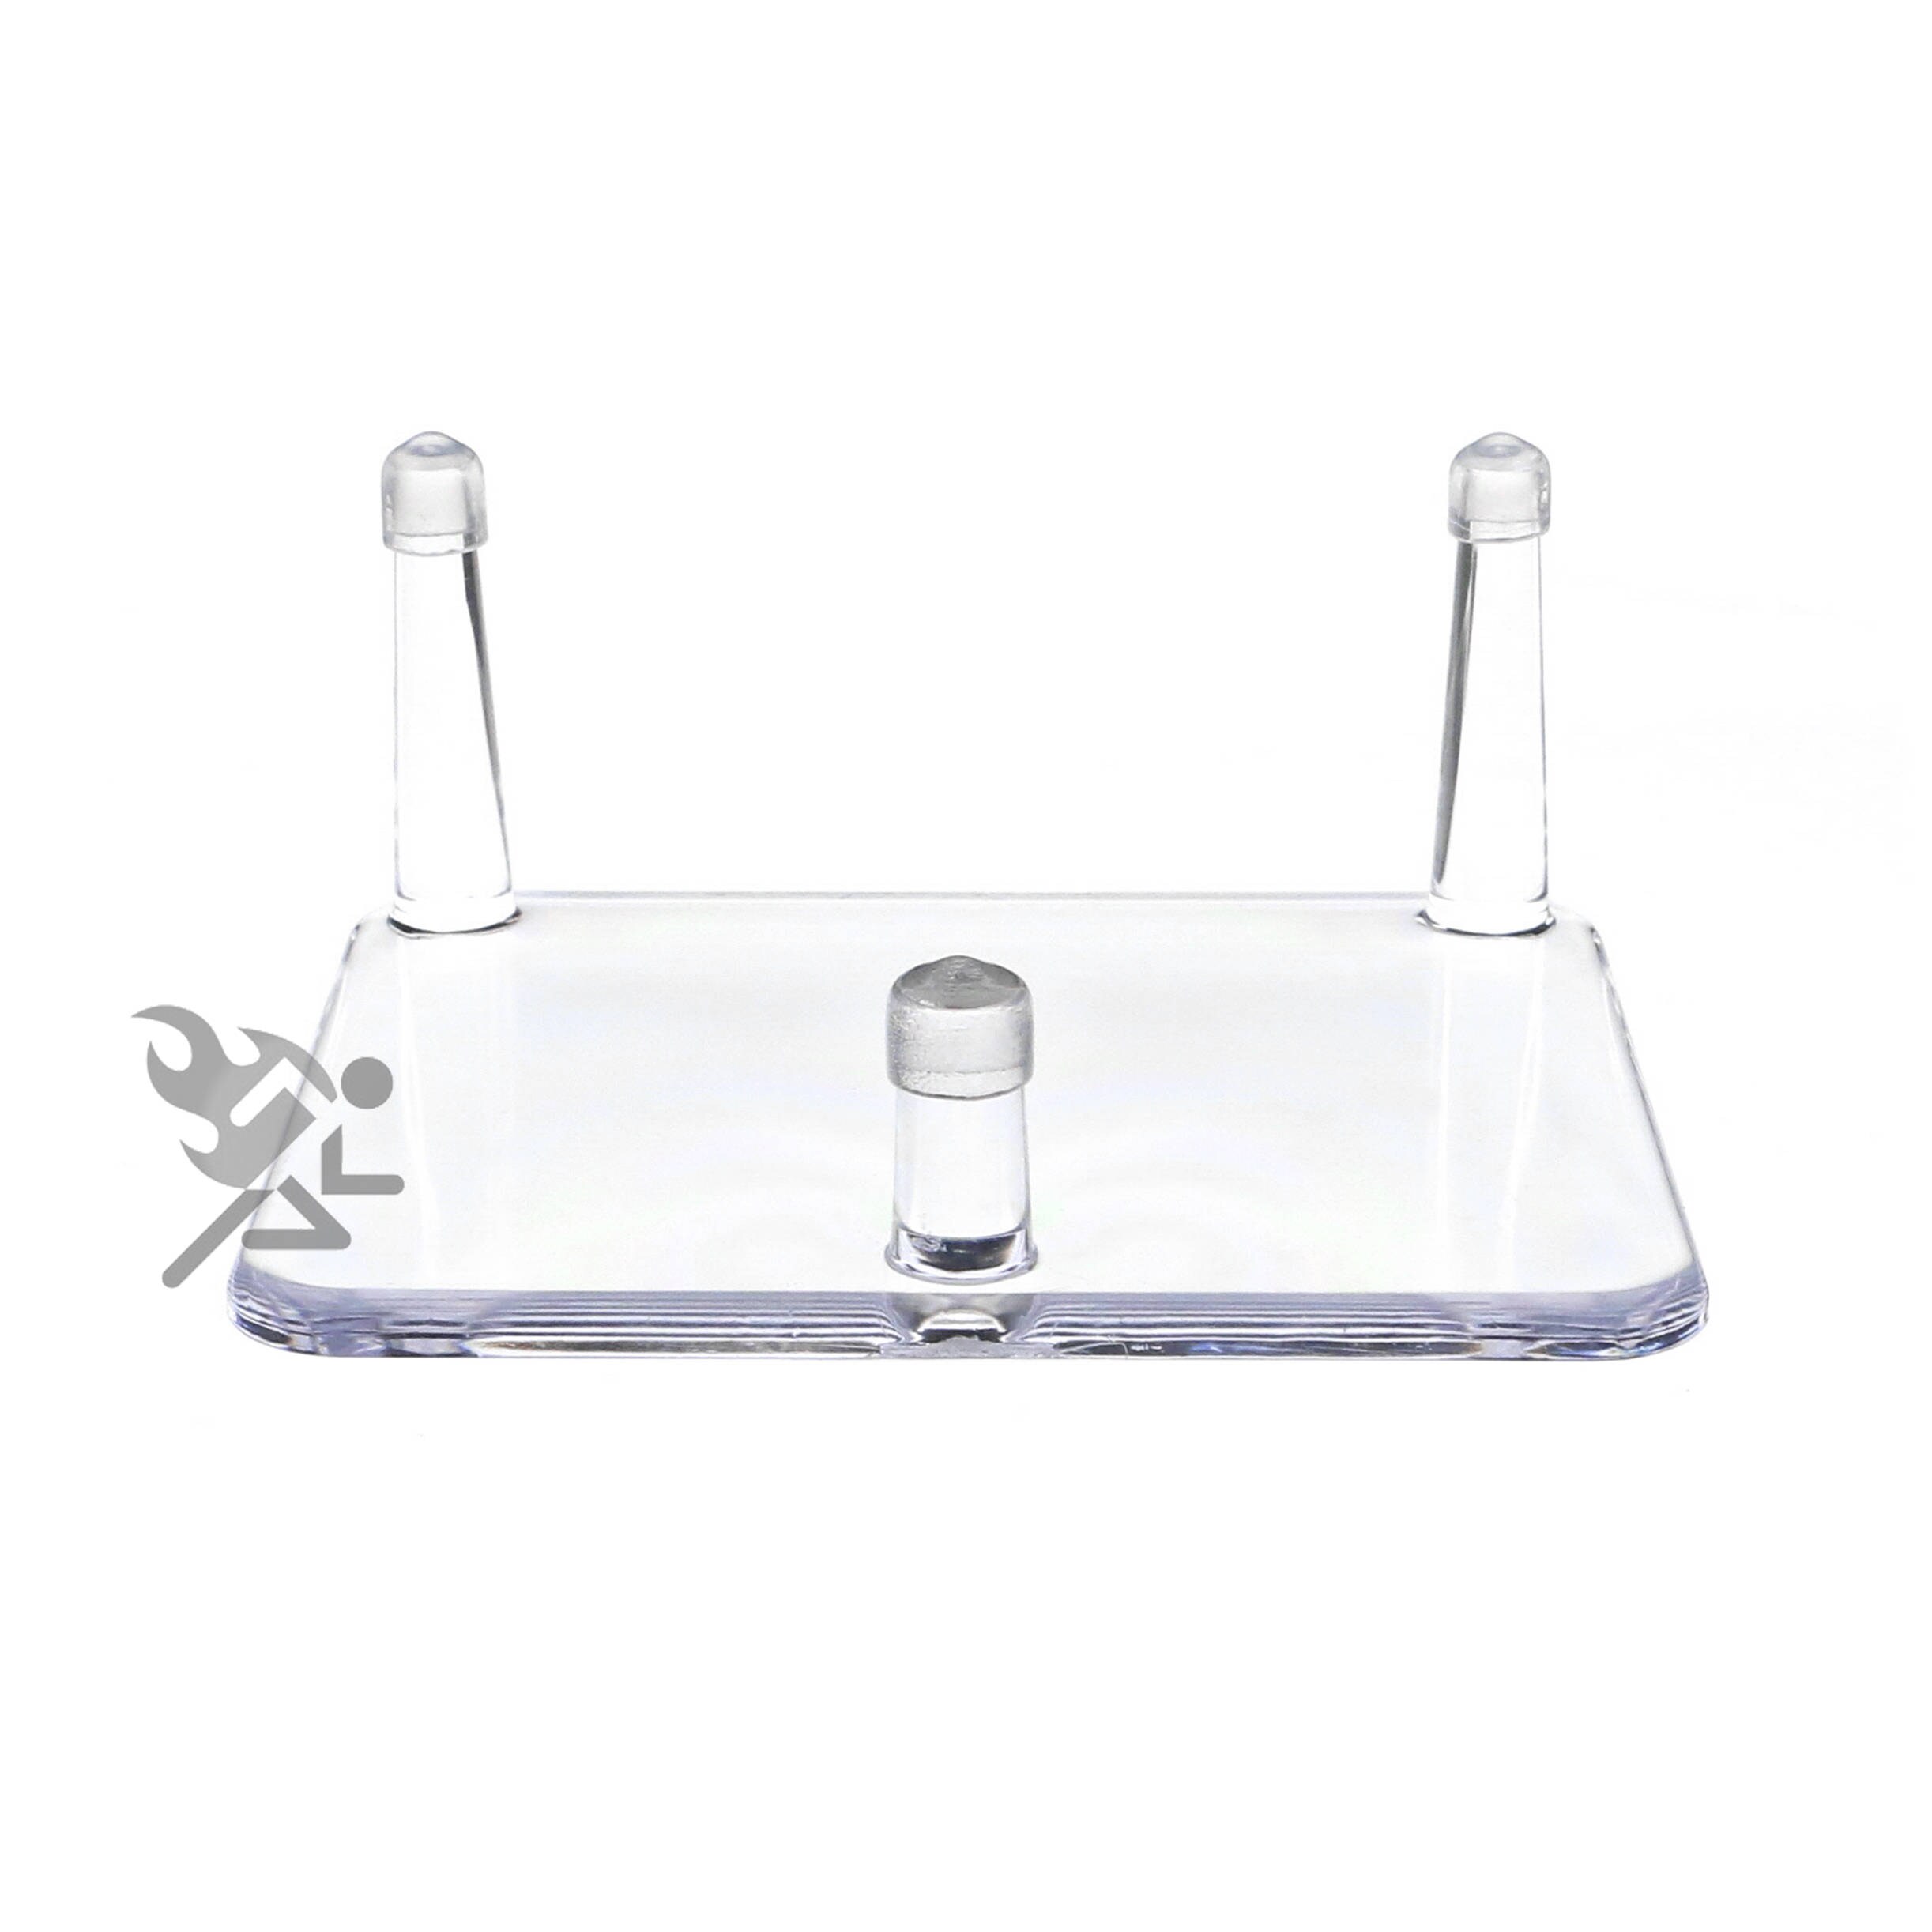 Acrylic Rectangle Peg Display Stands / Table Stands - The Fossil